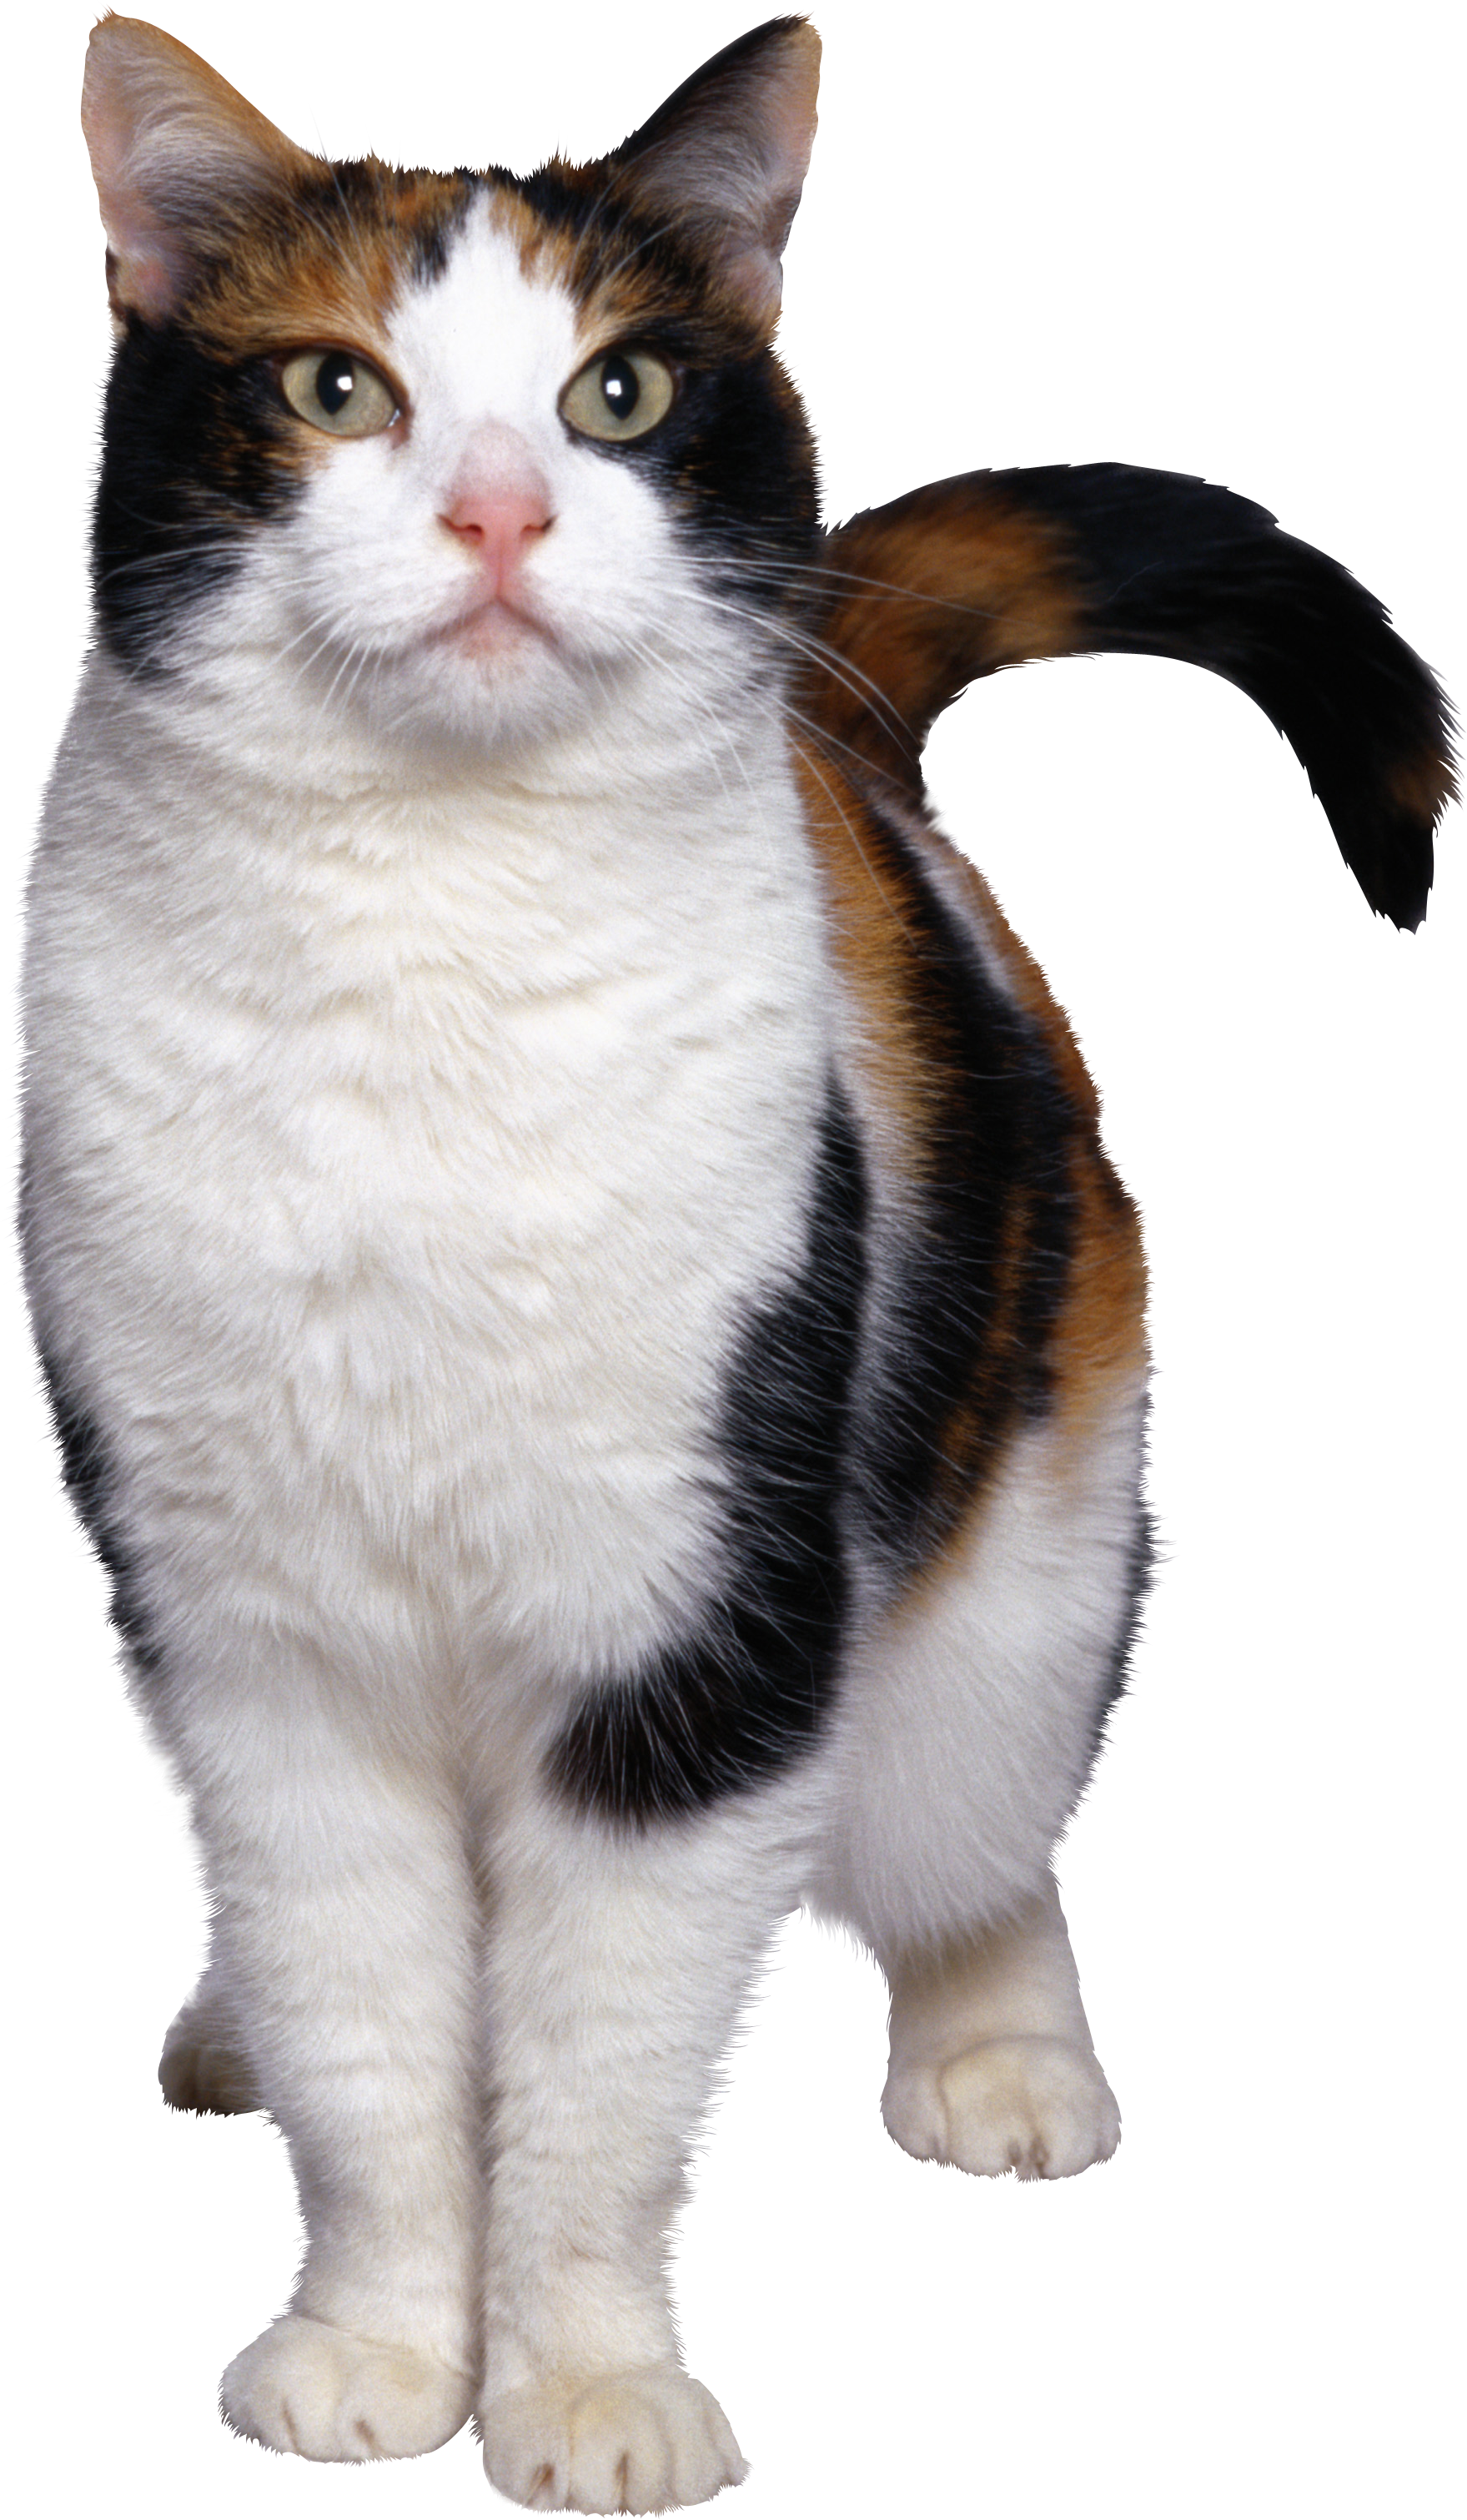 Cat Png Image, Free Download Picture, Kitten - Cat, Transparent background PNG HD thumbnail